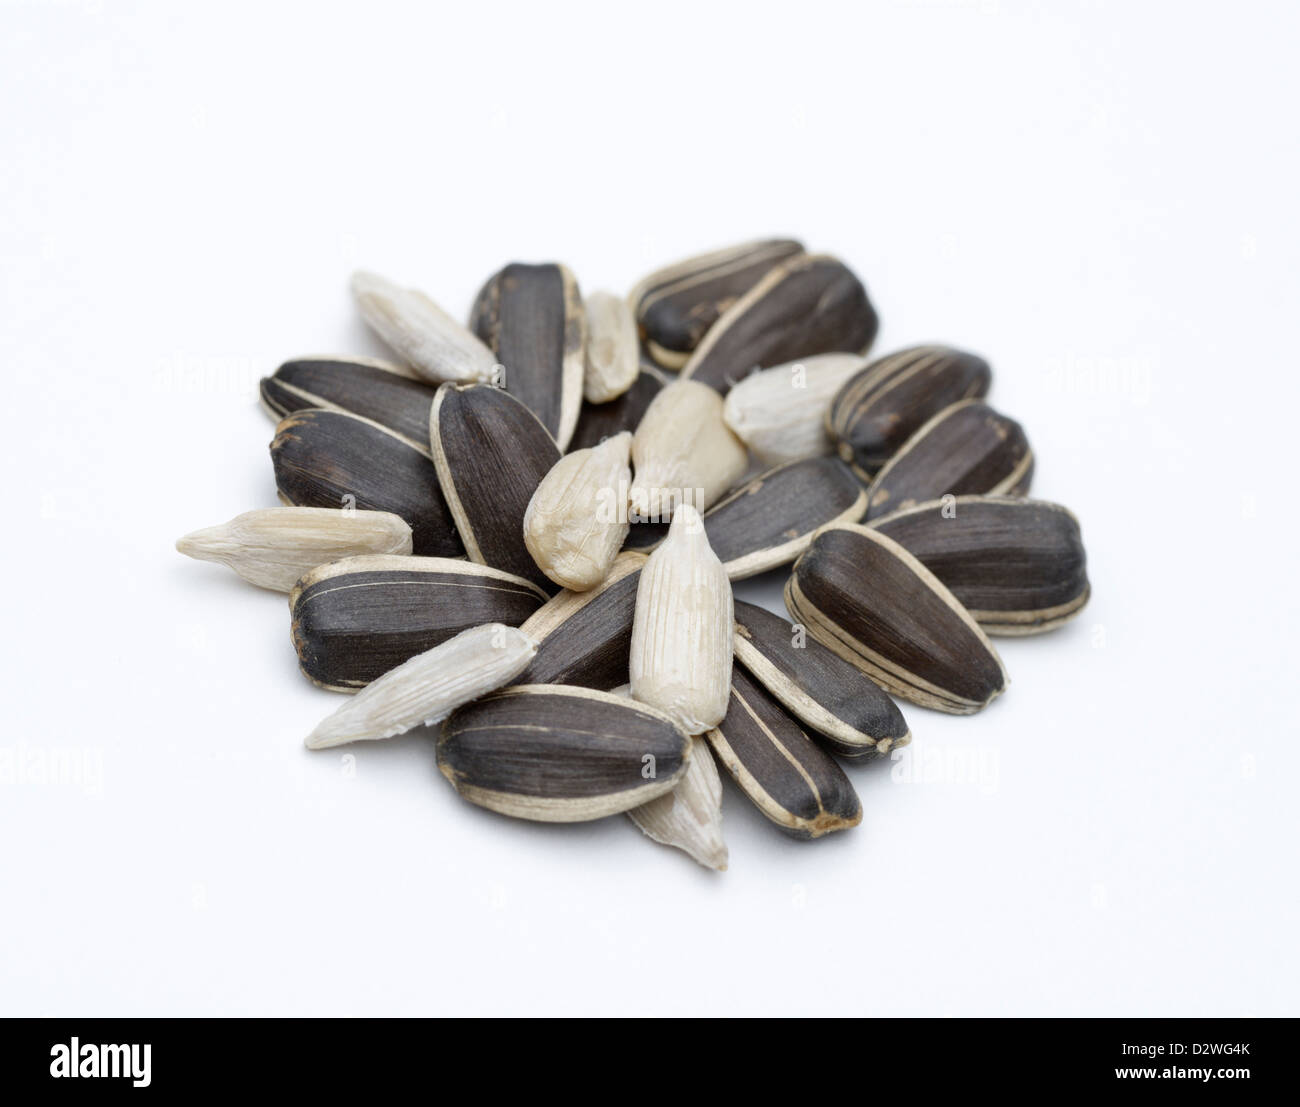 Sunflower seeds, hulled and de-hulled. The white is the kernel of the fruit (achene).  The black 'shell' is the pericarp. Stock Photo